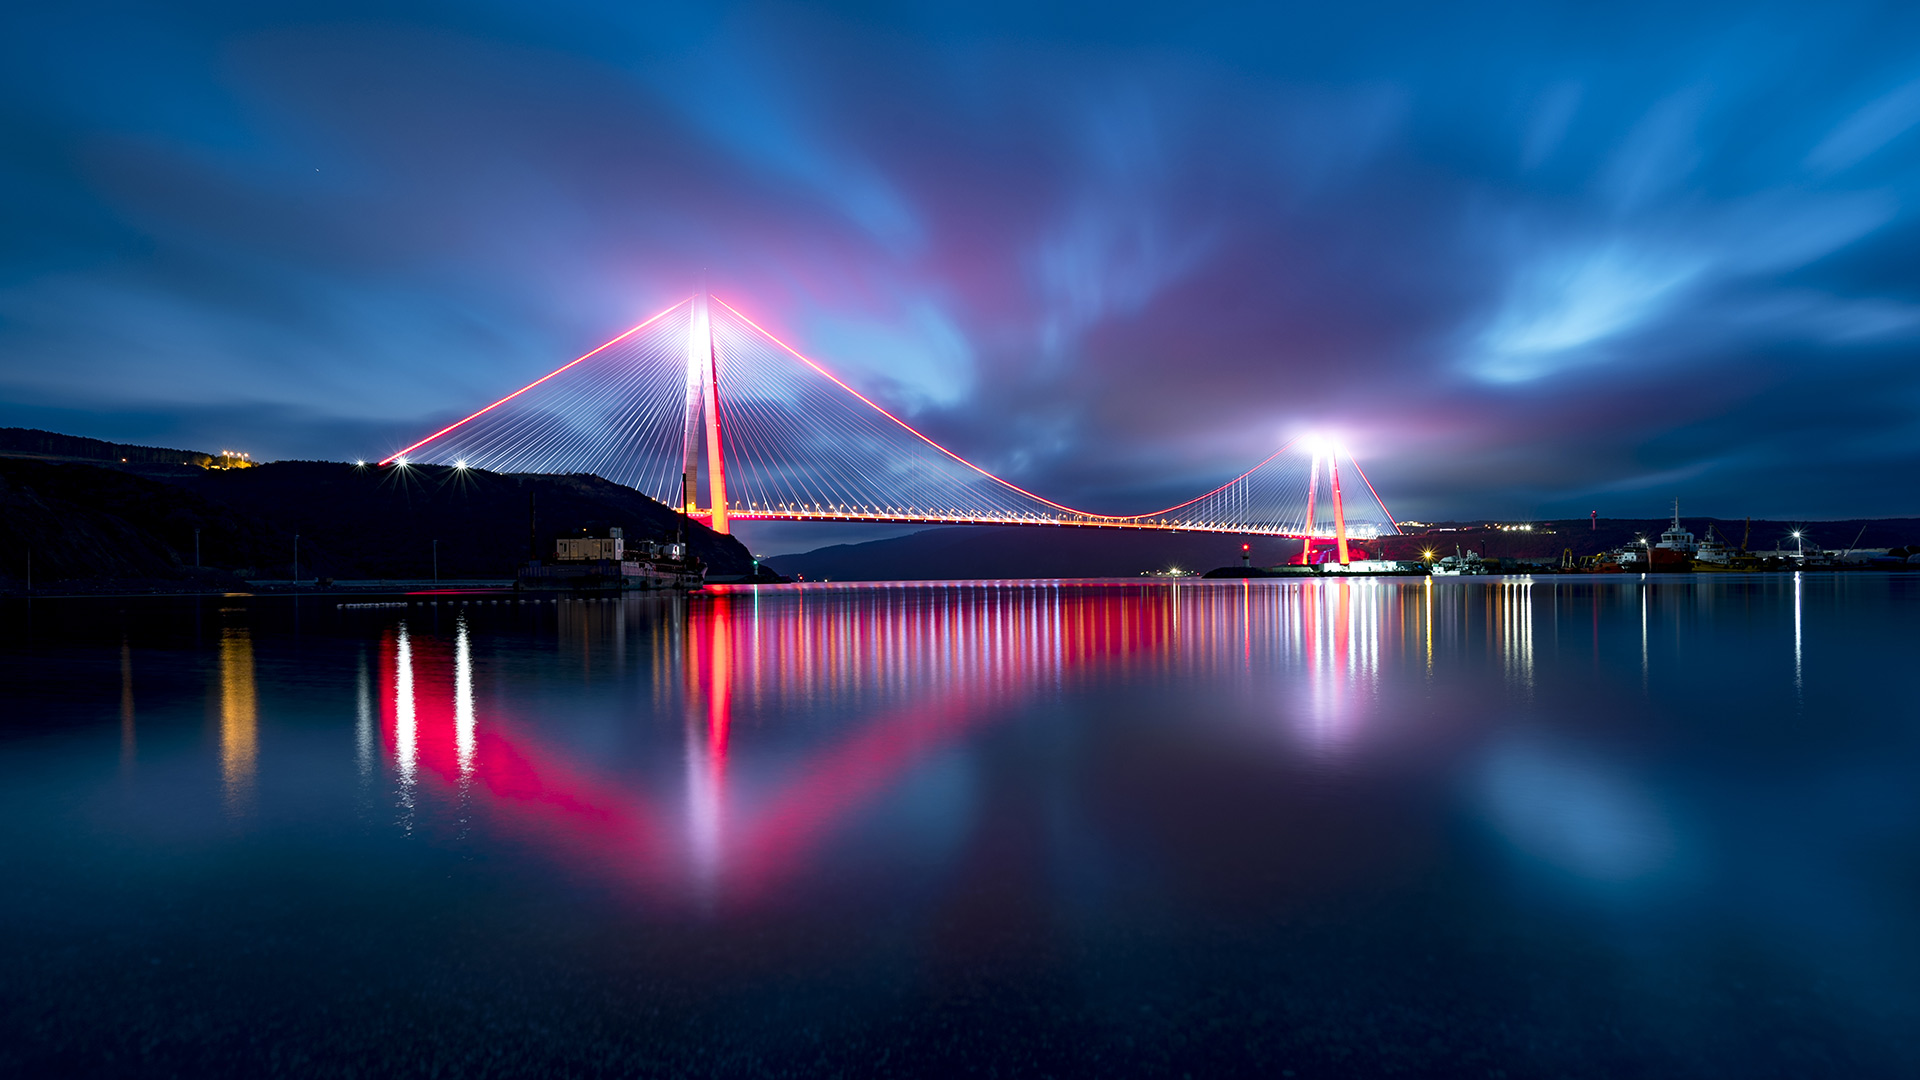 lighted bridge over water at night time